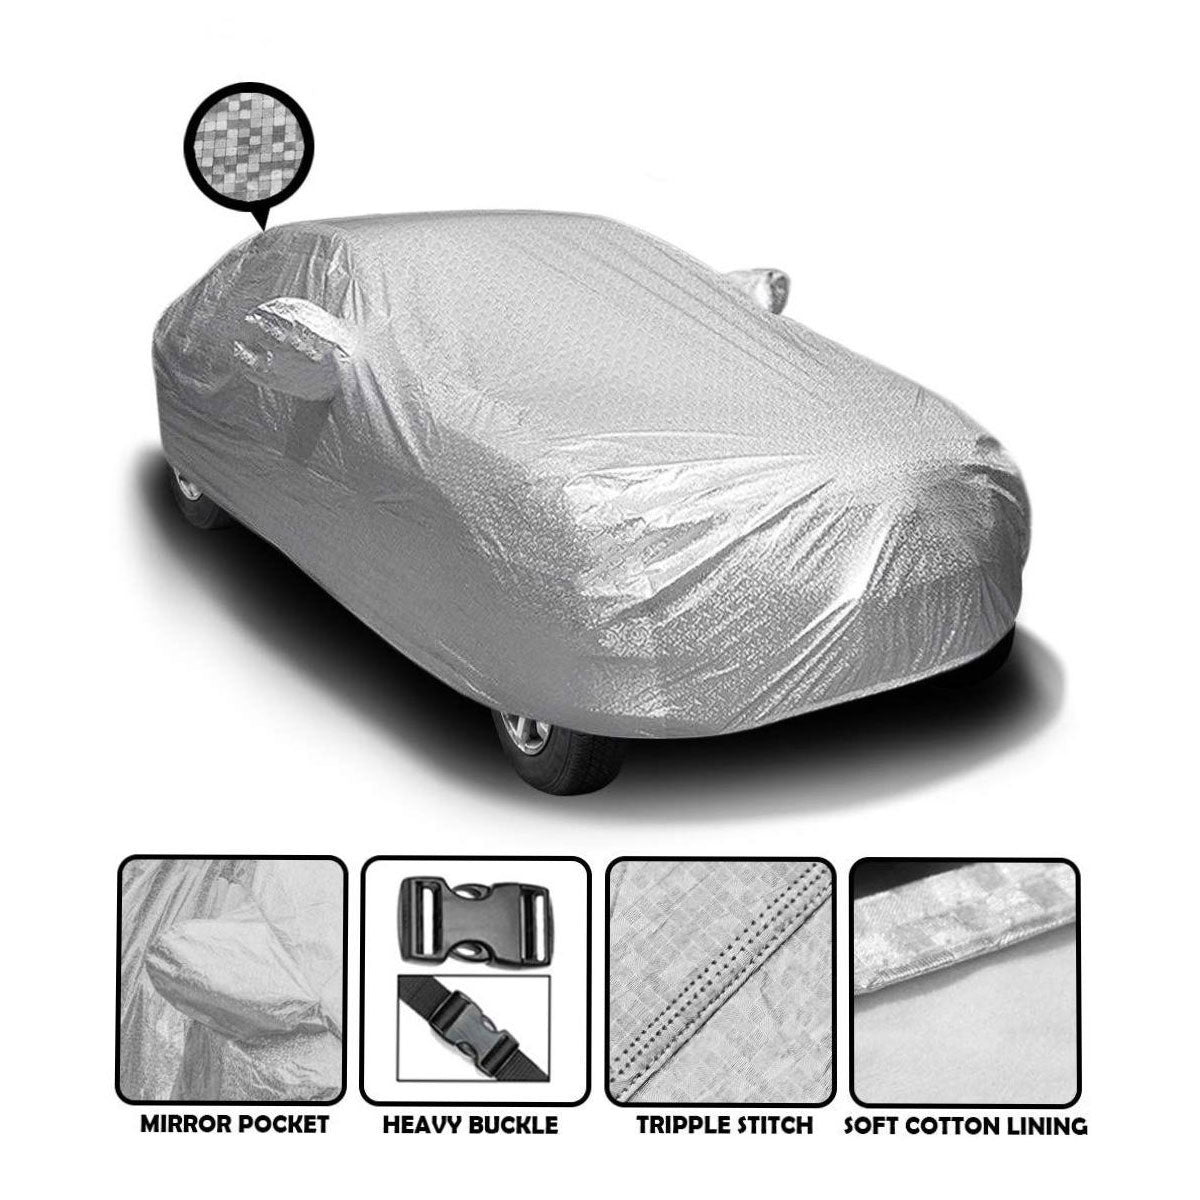 Oshotto Spyro Silver Anti Reflective, dustproof and Water Proof Car Body Cover with Mirror Pockets For Toyota Corolla